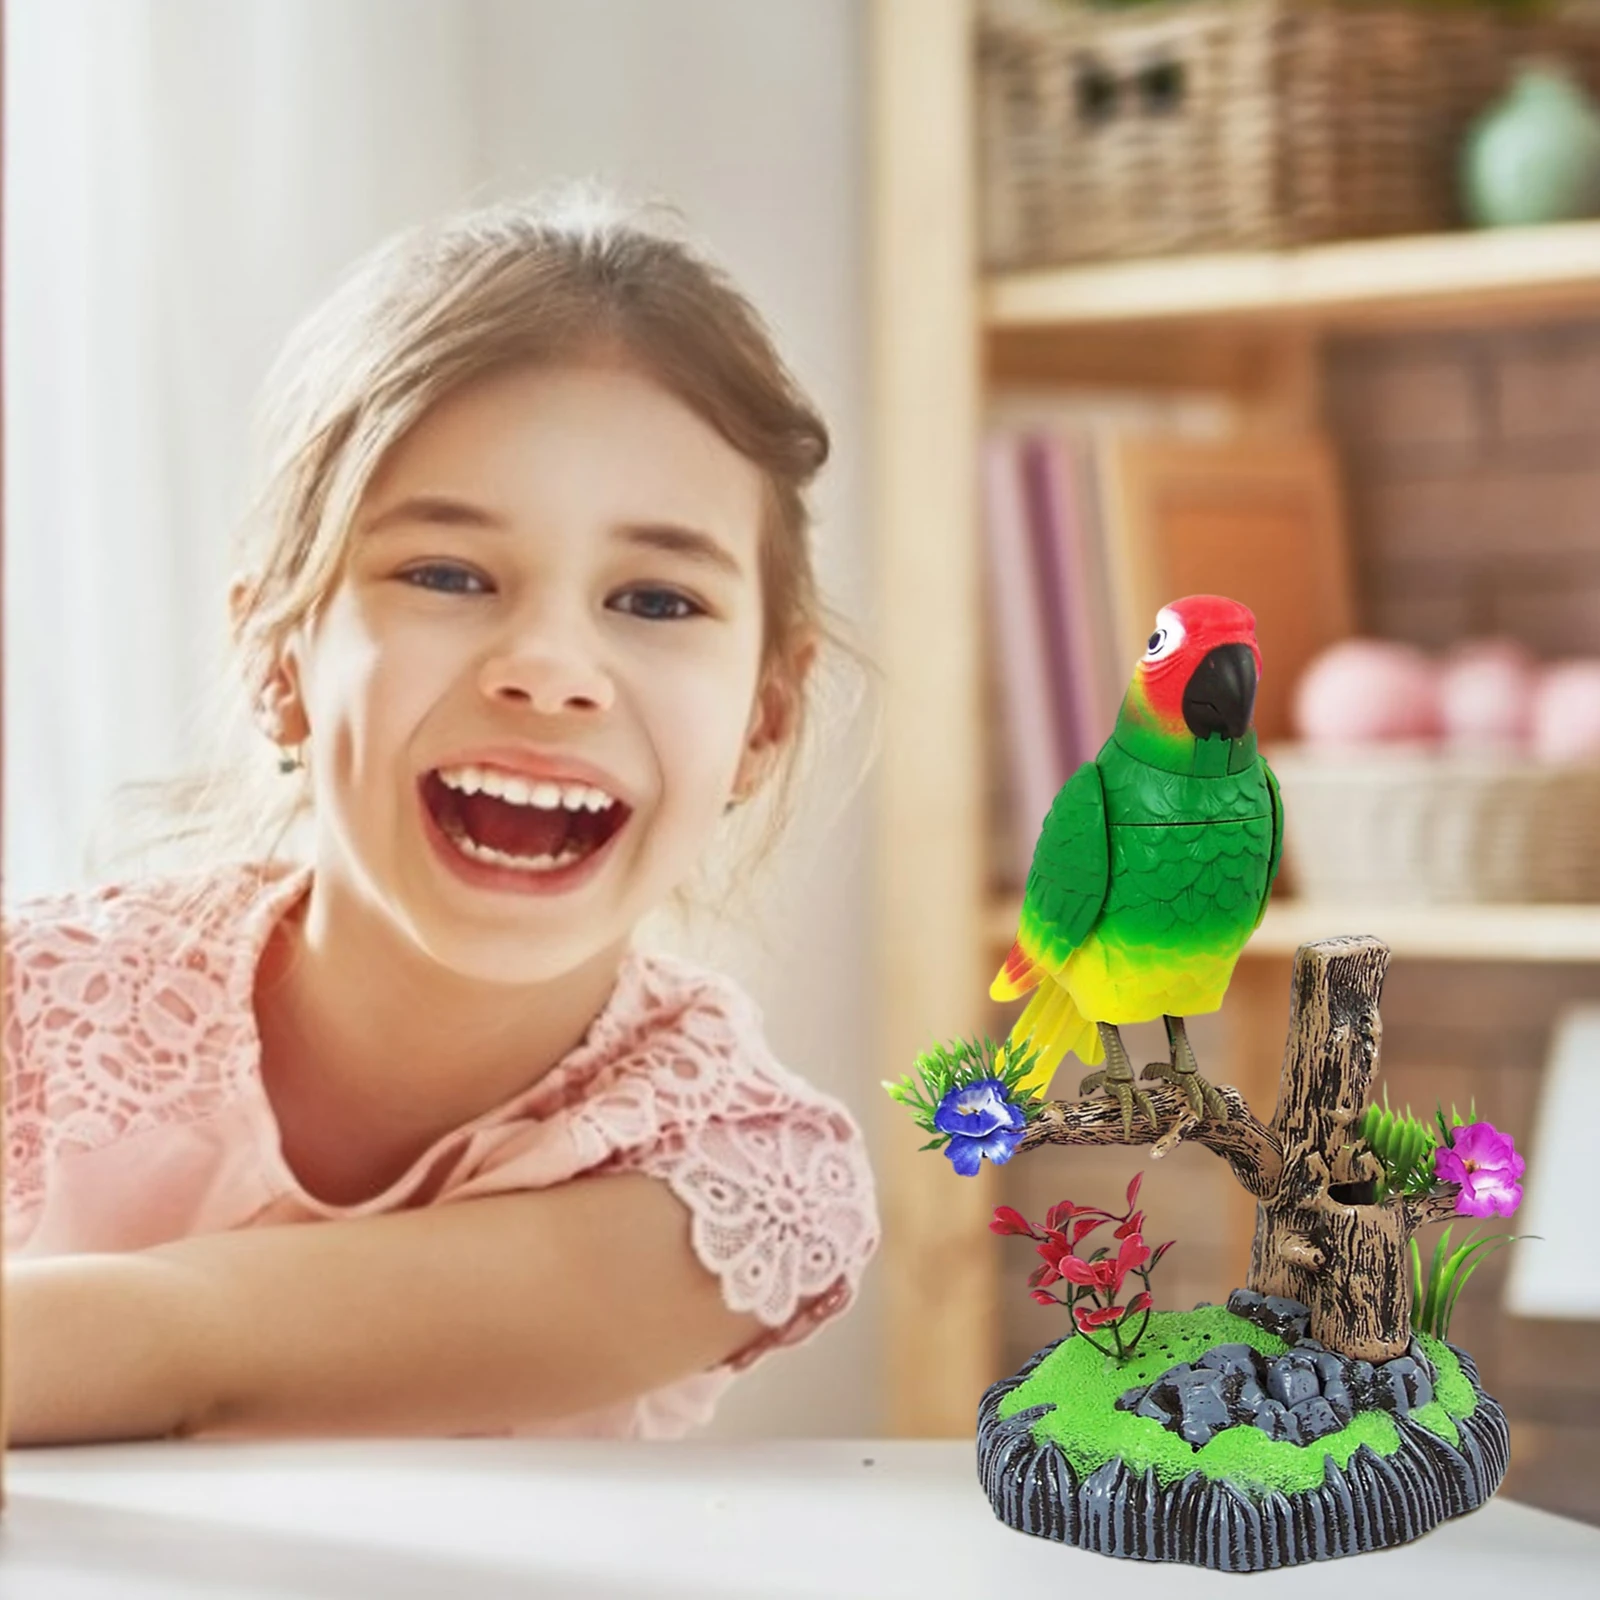 Singing Chirping Birds Toys Battery Operated Electronic Animal Pets Office Room Ornament Accessories Kids Birthday Gifts